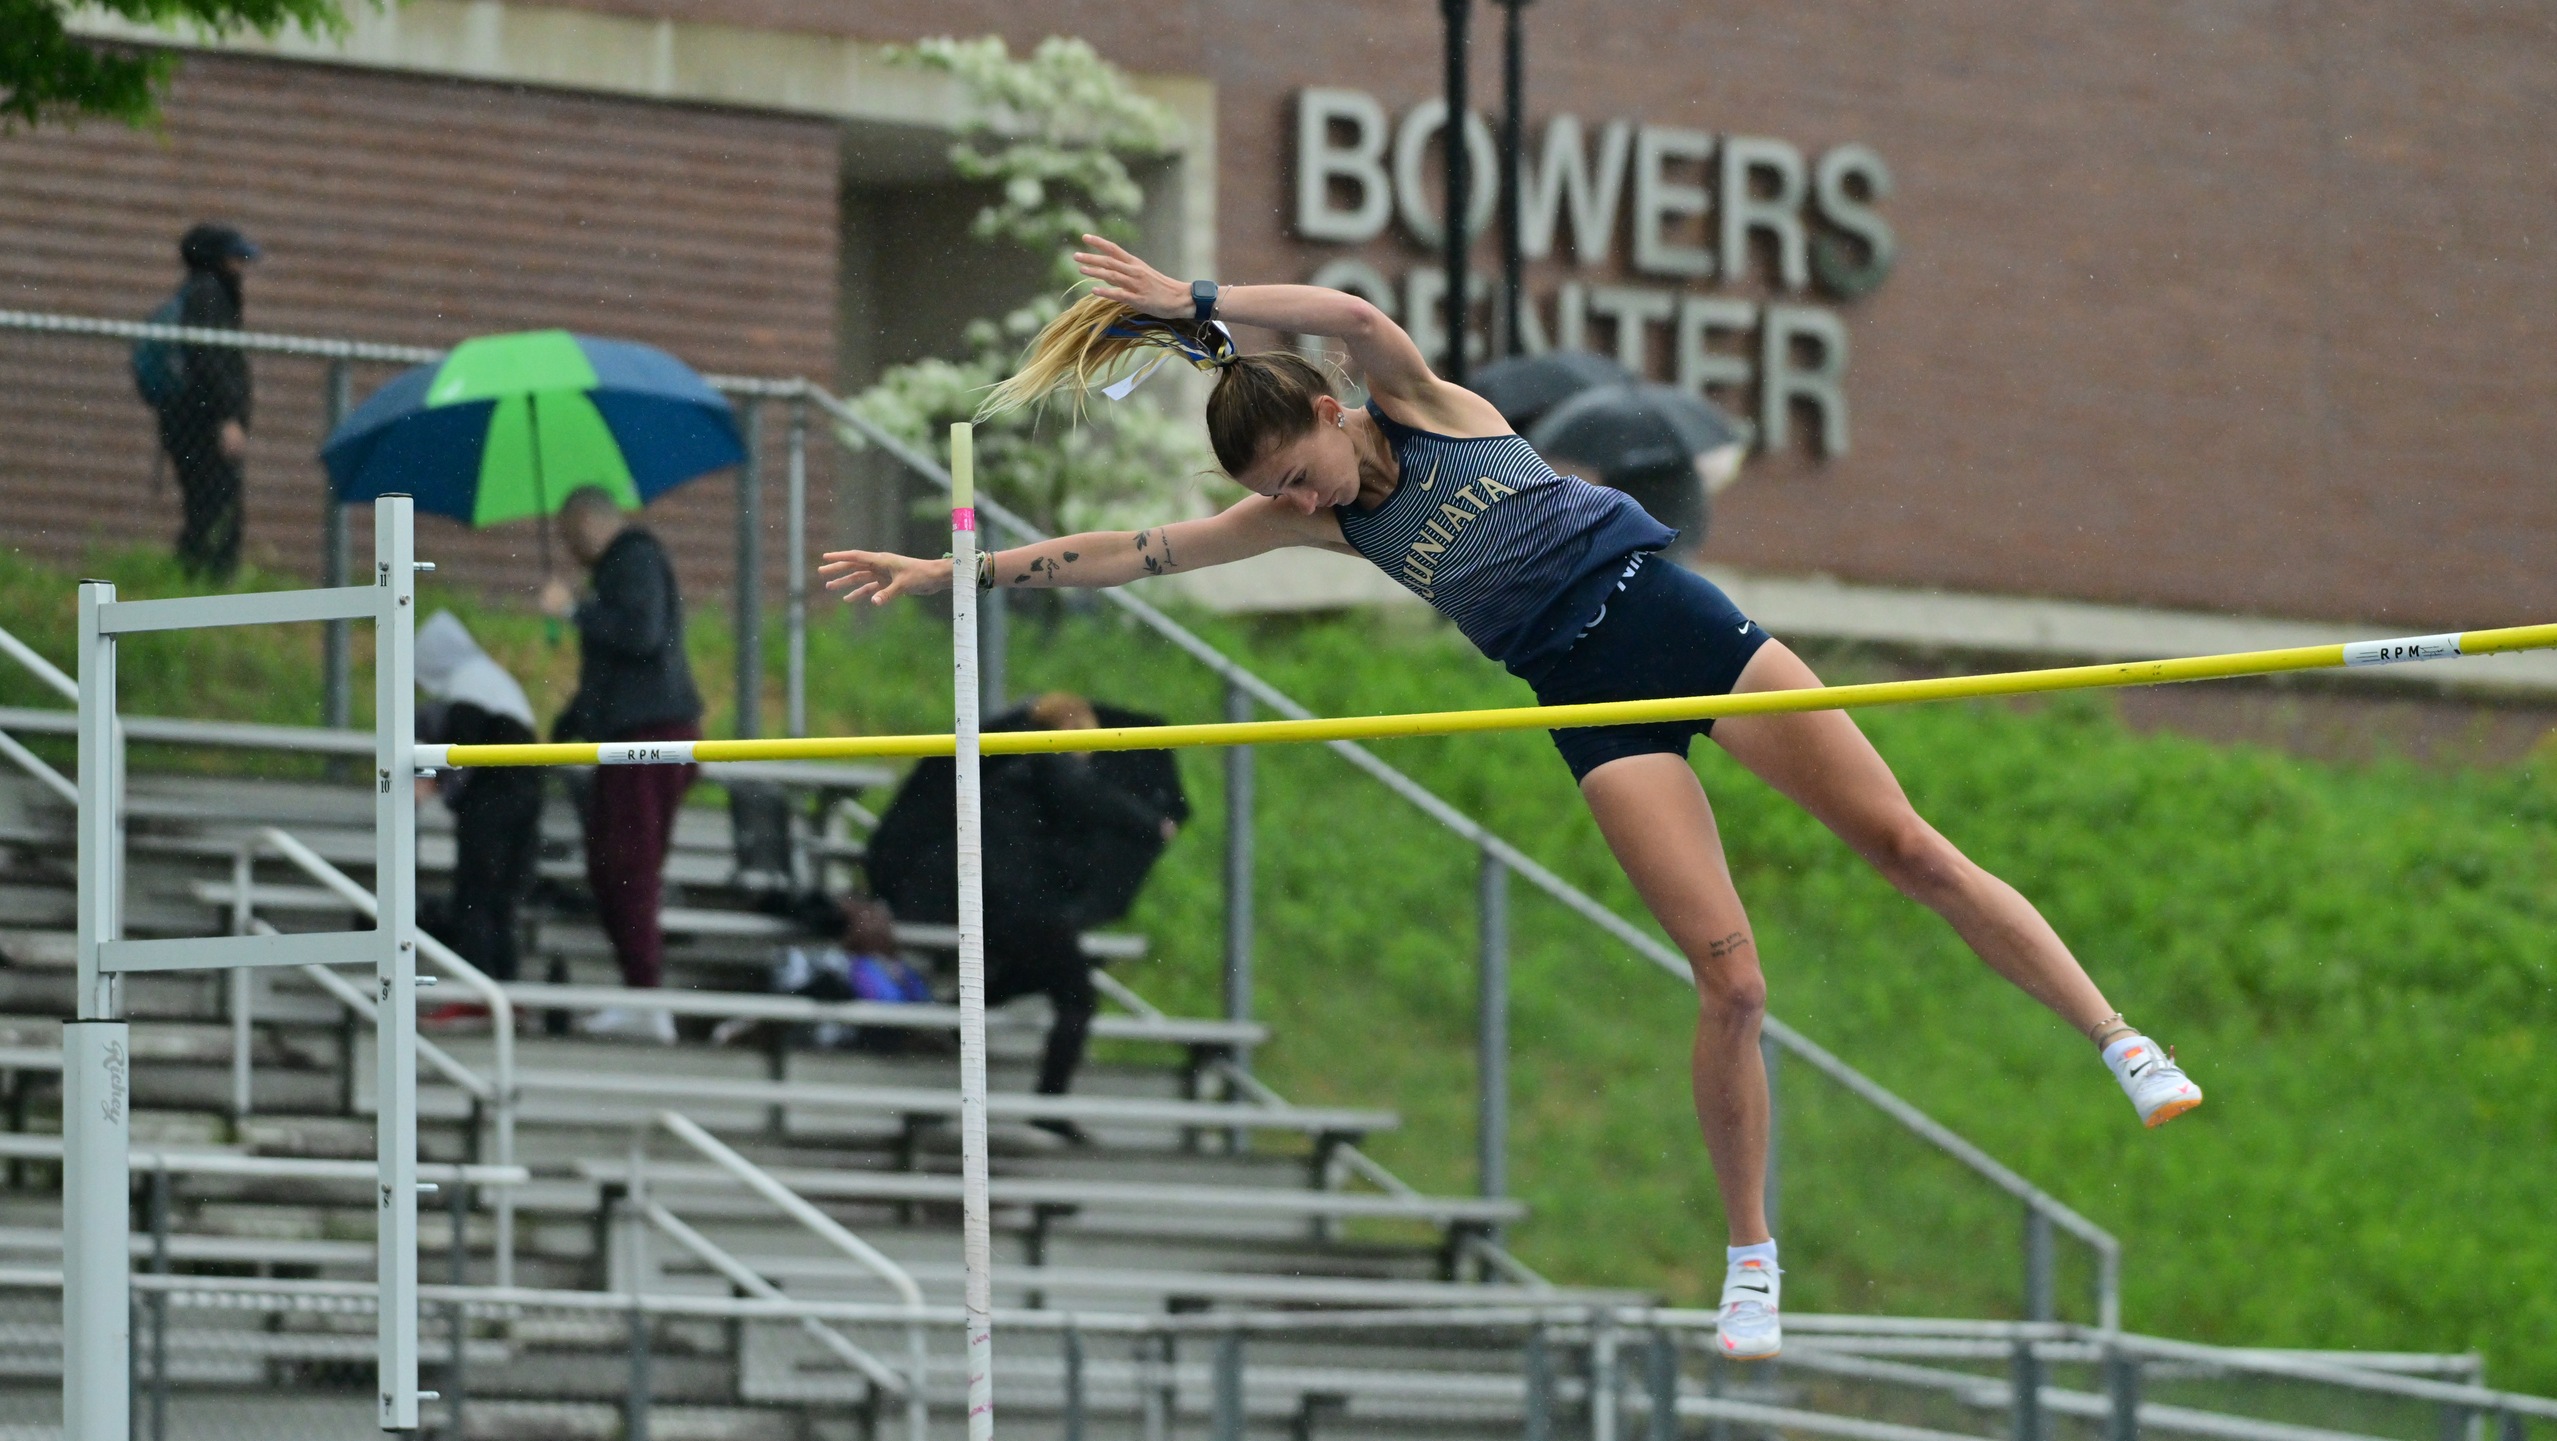 Barbacci Wins Pole Vault, Team Holds Sixth at Day One of Landmark Outdoor Champs